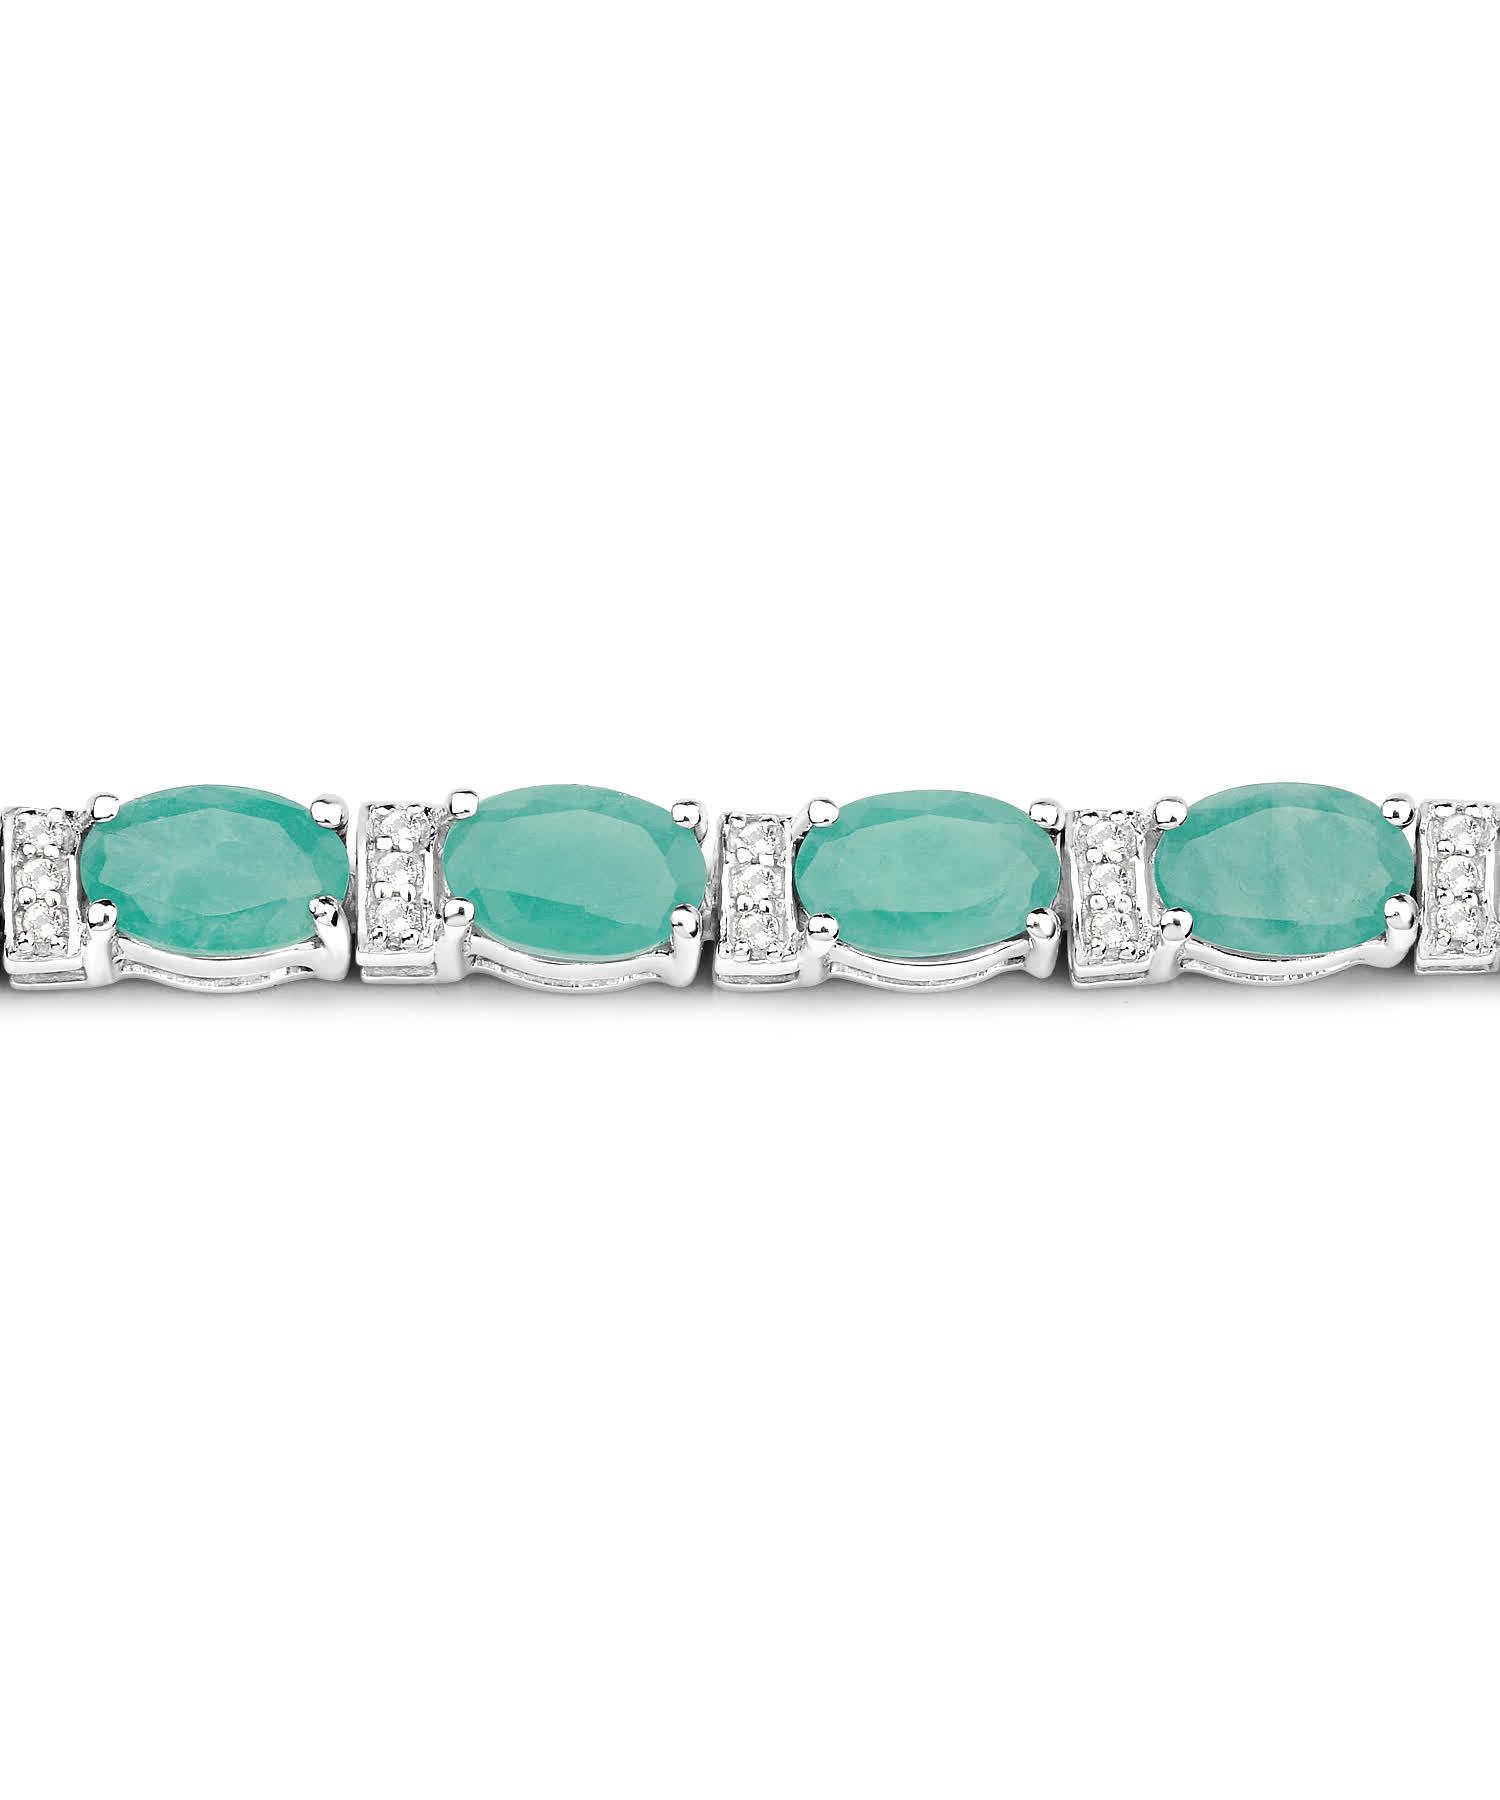 10.47ctw Natural Emerald and Topaz Rhodium Plated 925 Sterling Silver Tennis Bracelet View 2